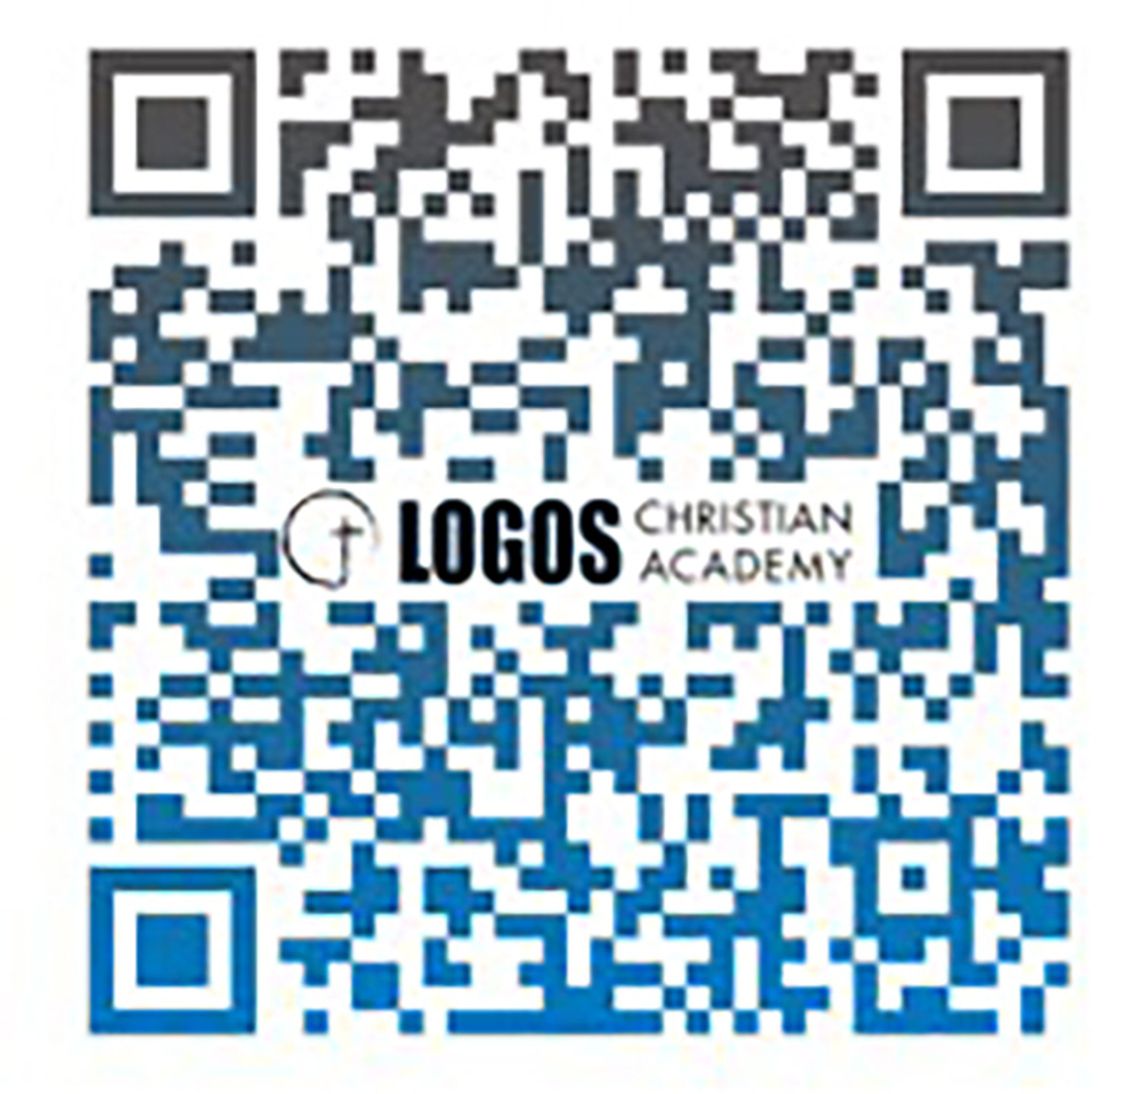 Logos Christian Academy -A New Location for the New School Year